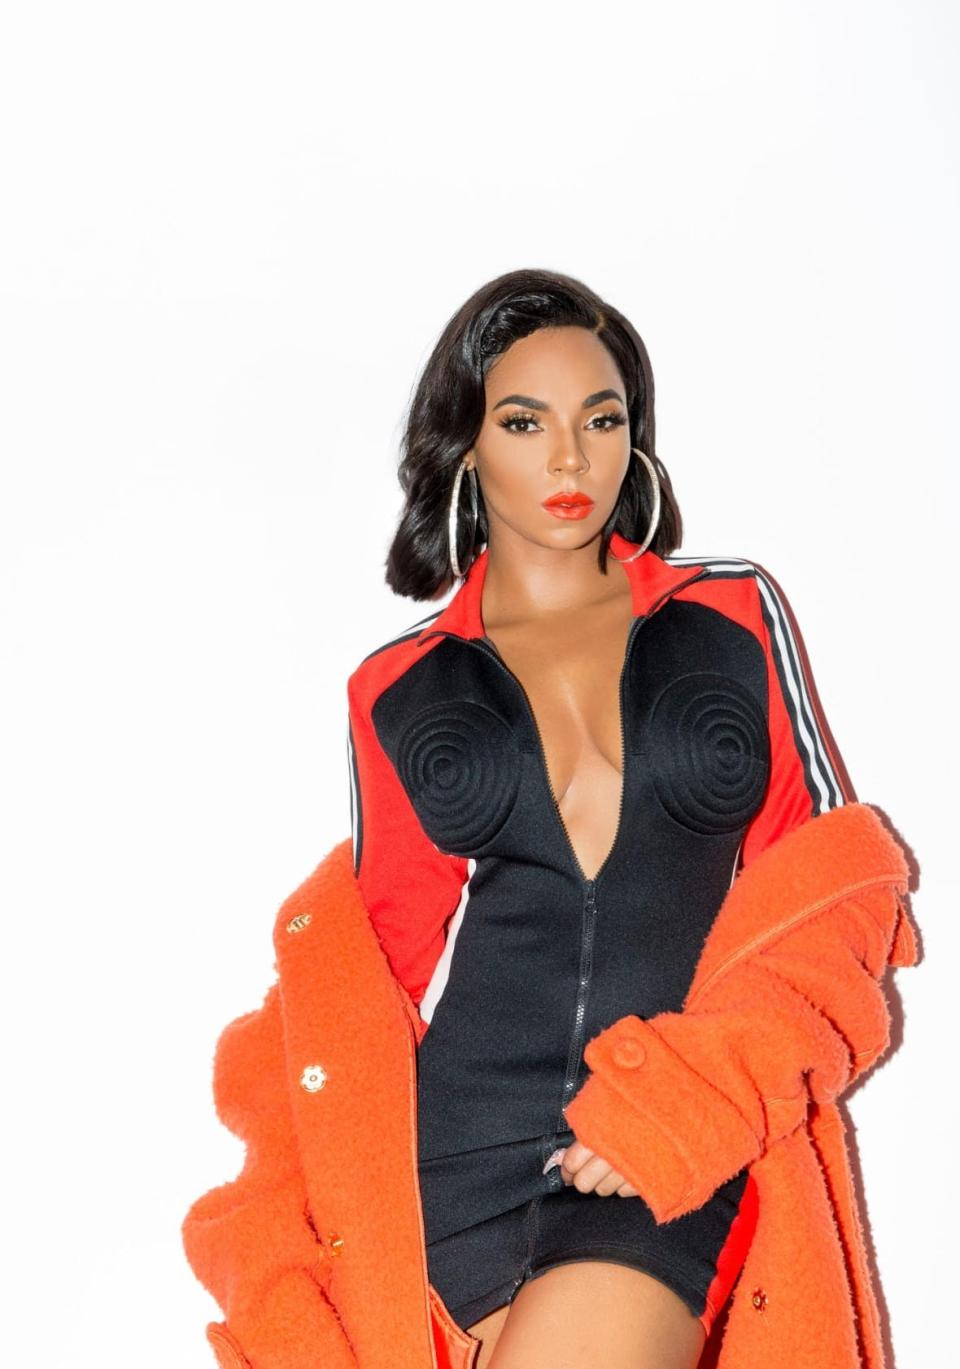 Ashanti is scheduled to perform on Jan. 26, 2023, at New York City’s Apollo Theater as a guest of headliner Lil’ Kim. The concert is one of the opening events of the Harlem Festival of Culture. (Photo courtesy of Harlem Festival of Culture)